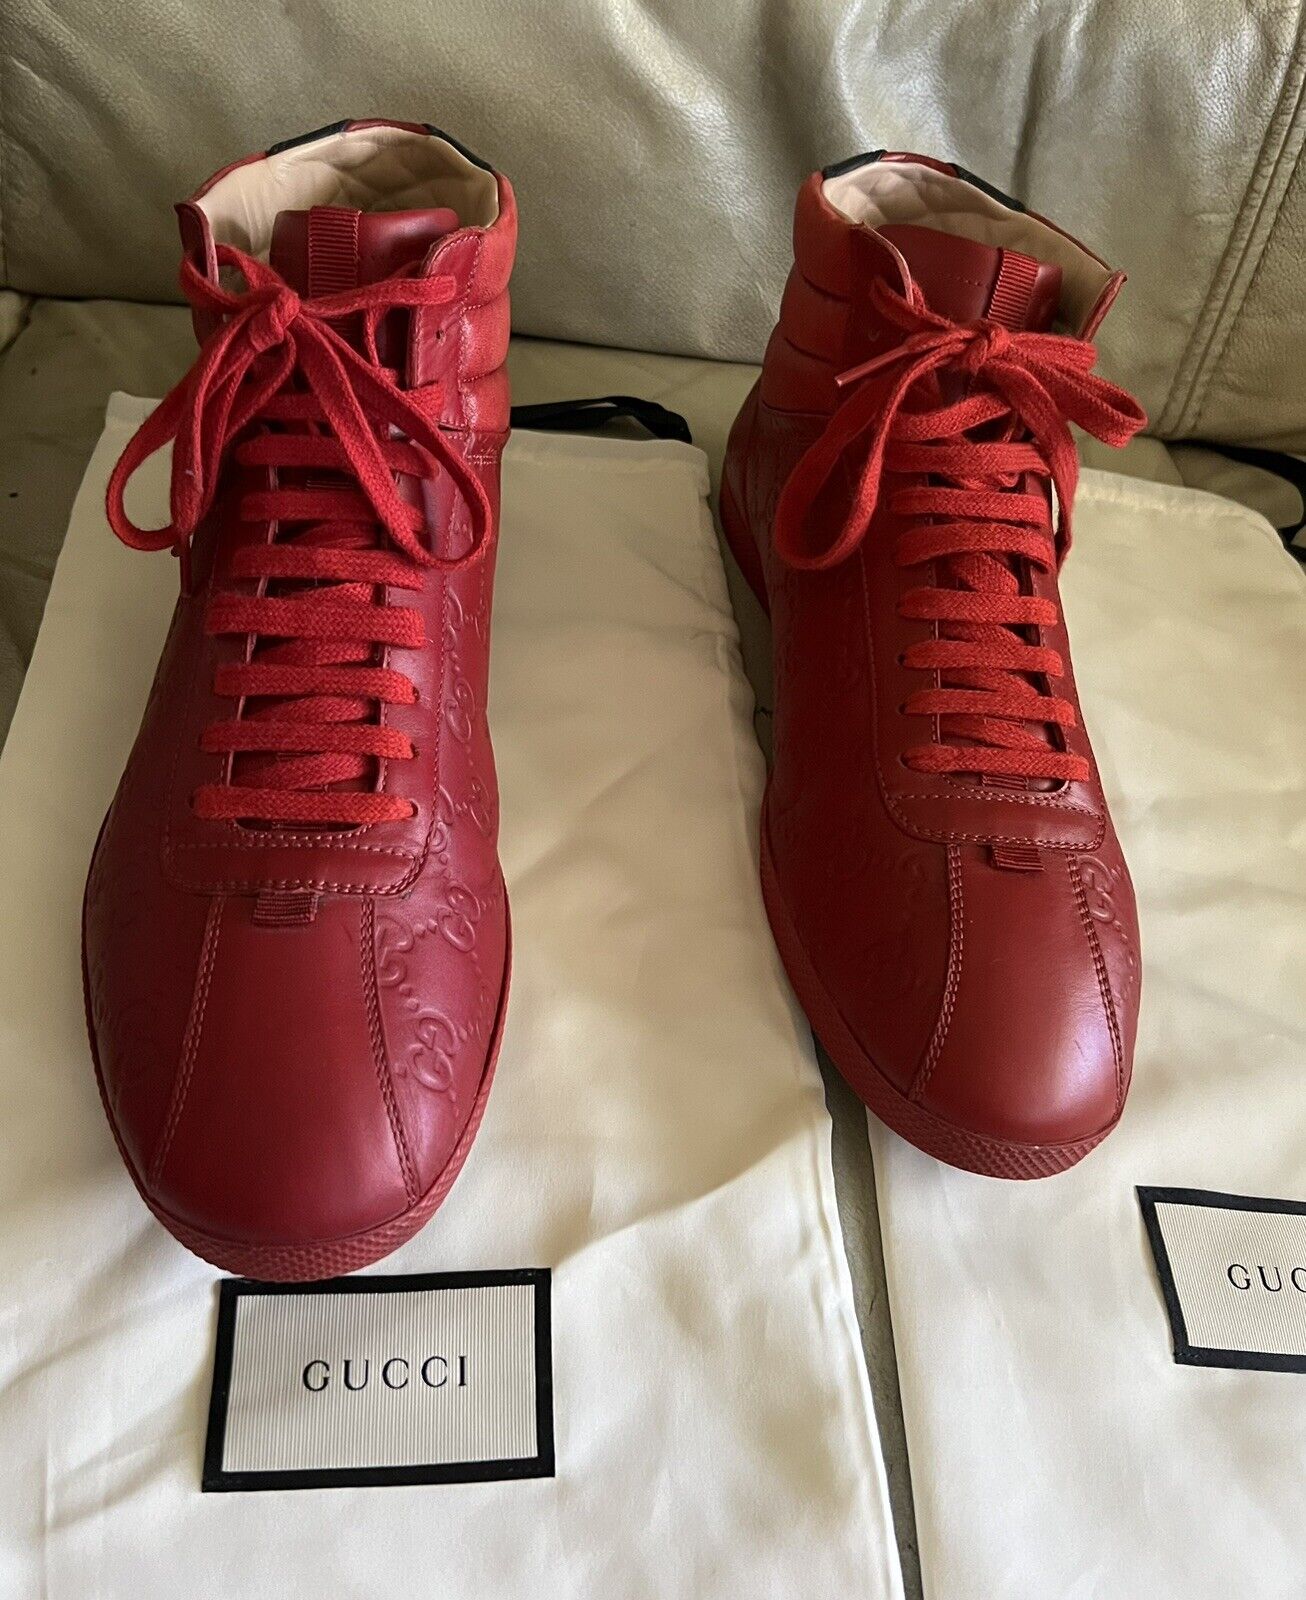 GUCCI BAMBI GUCCISSIMA EMBOSSED RED LEATHER HIGH … - image 4